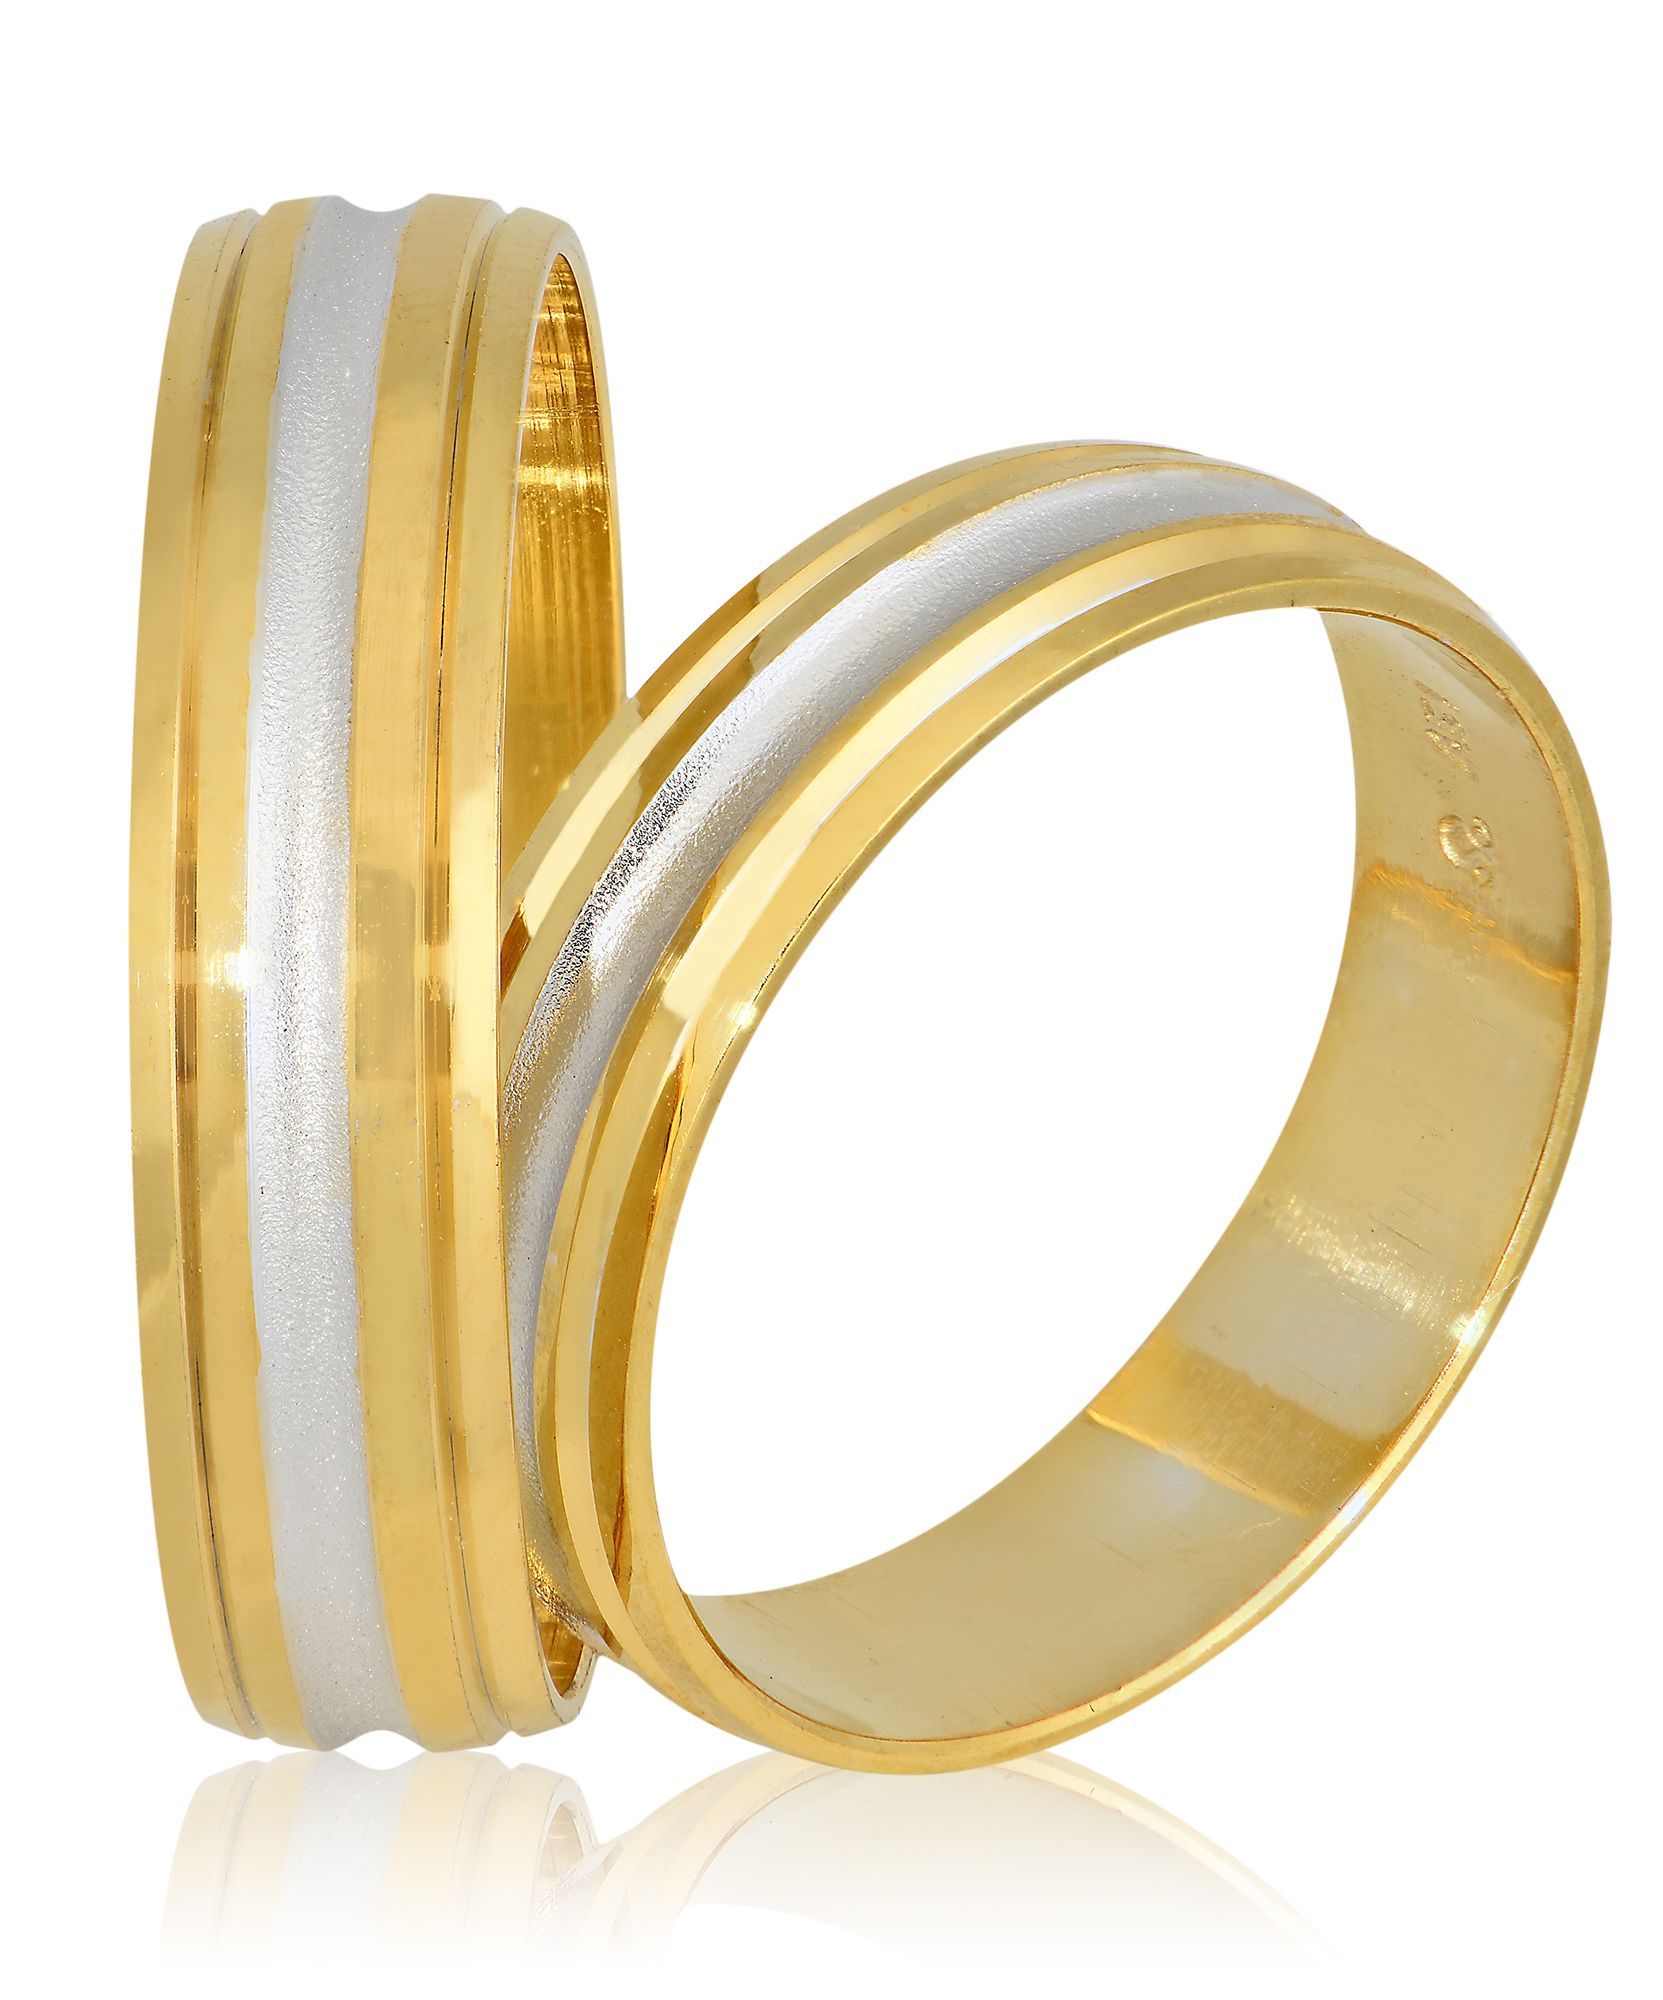 White gold & yellow gold wedding rings 5mm (code S57)